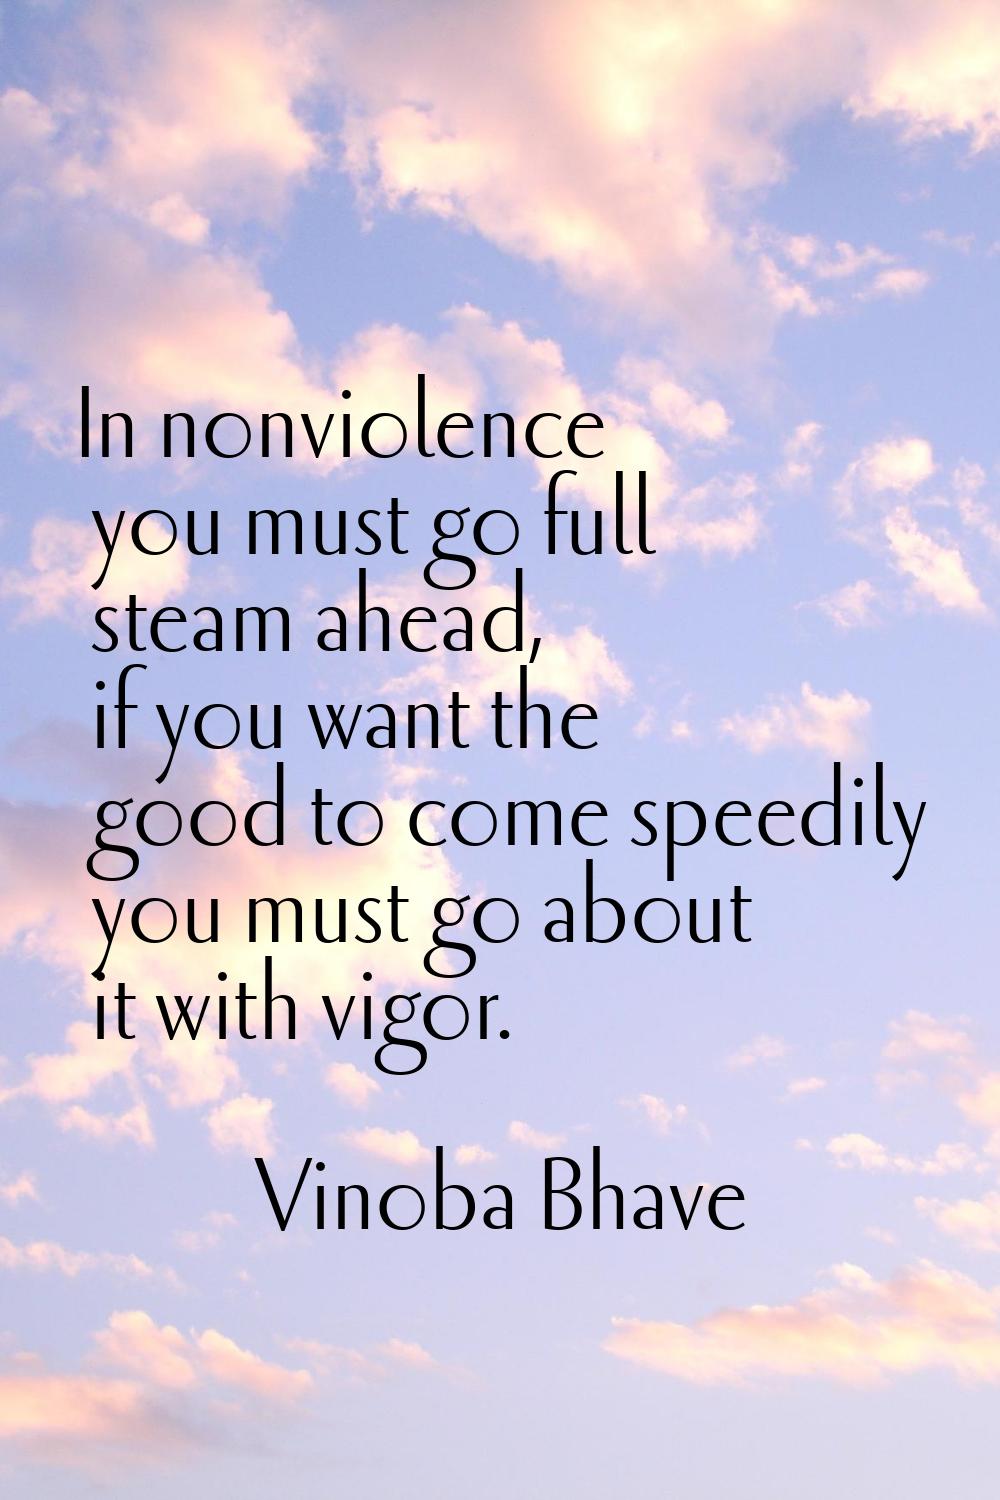 In nonviolence you must go full steam ahead, if you want the good to come speedily you must go abou